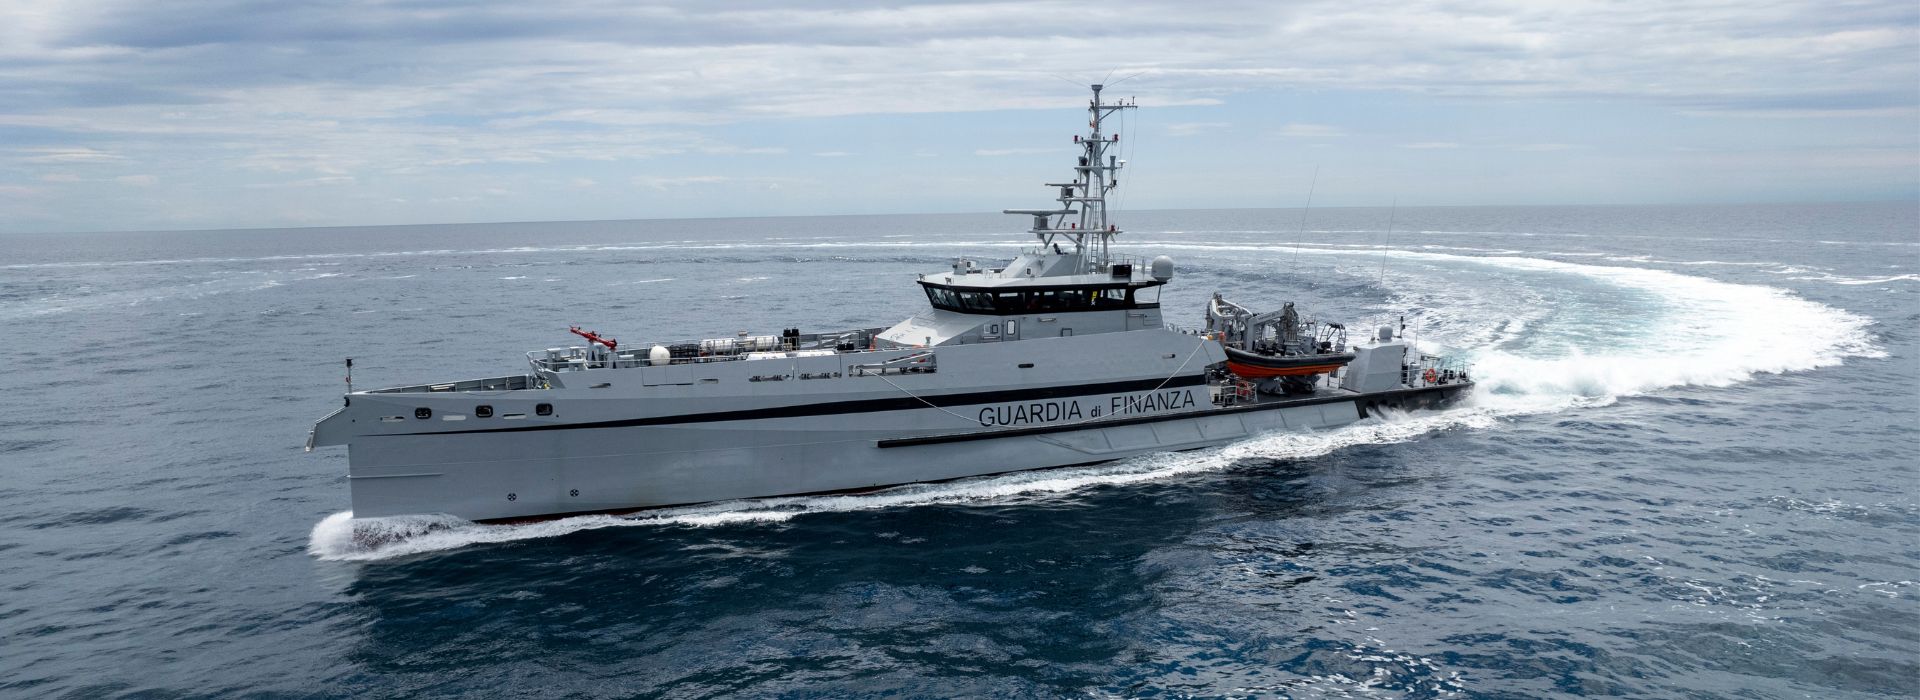 OPV606, Offshore Patrol Vessels, Cantiere Navale Vittoria